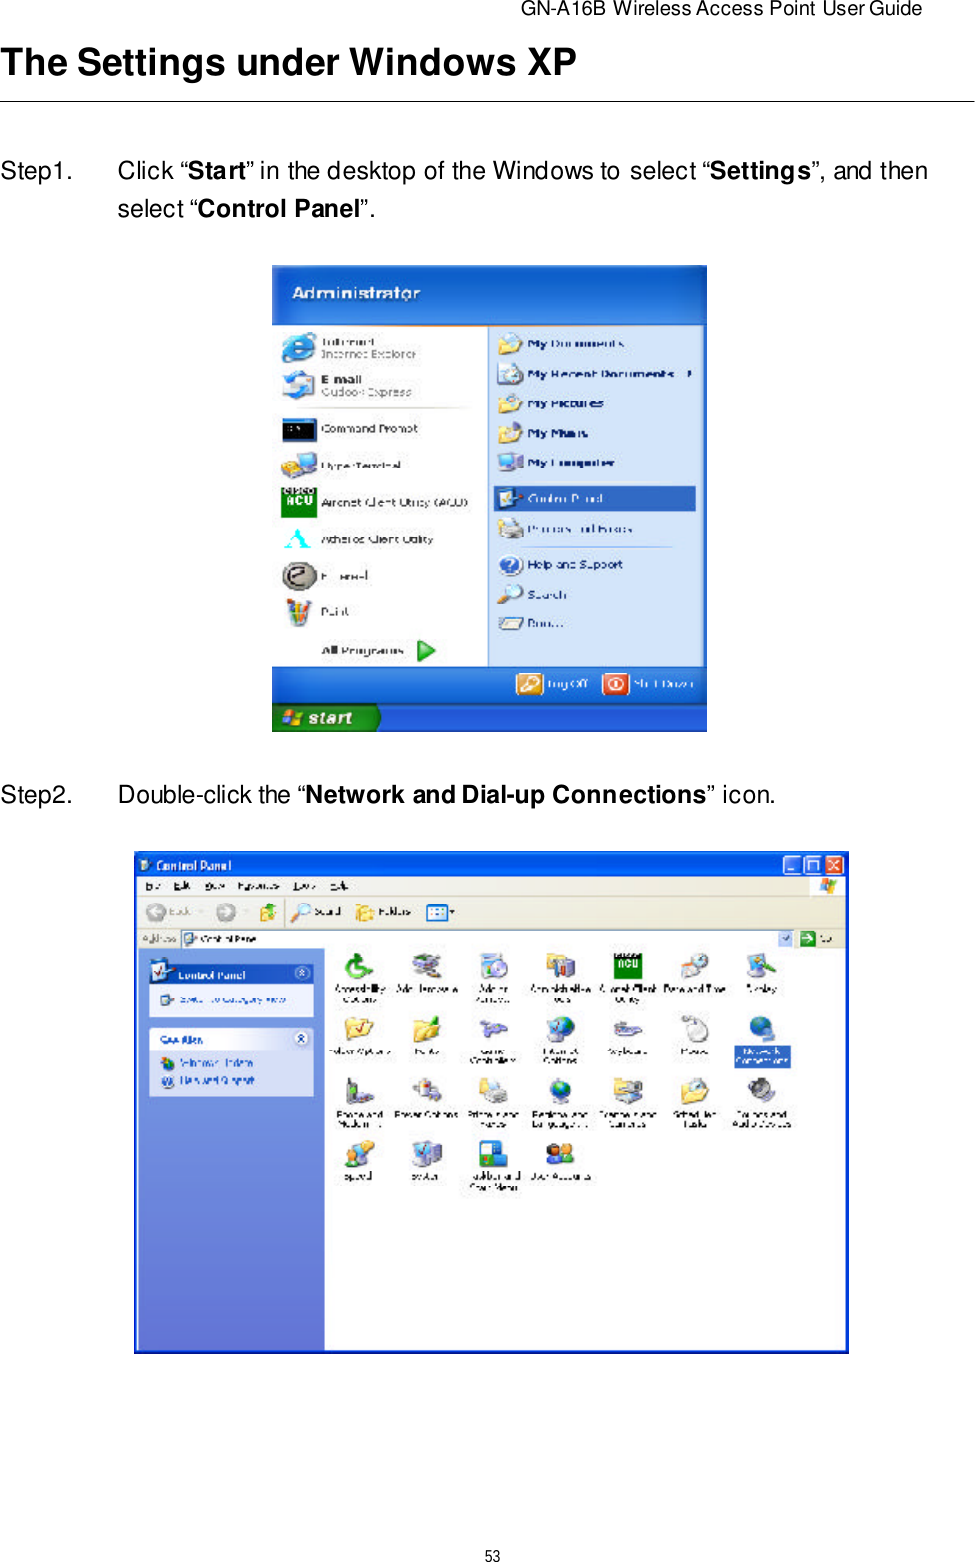                          GN-A16B Wireless Access Point User Guide53The Settings under Windows XPStep1.Click “Start” in the desktop of the Windows to select “Settings”, and thenselect “Control Panel”.Step2.Double-click the “Network and Dial-up Connections” icon.